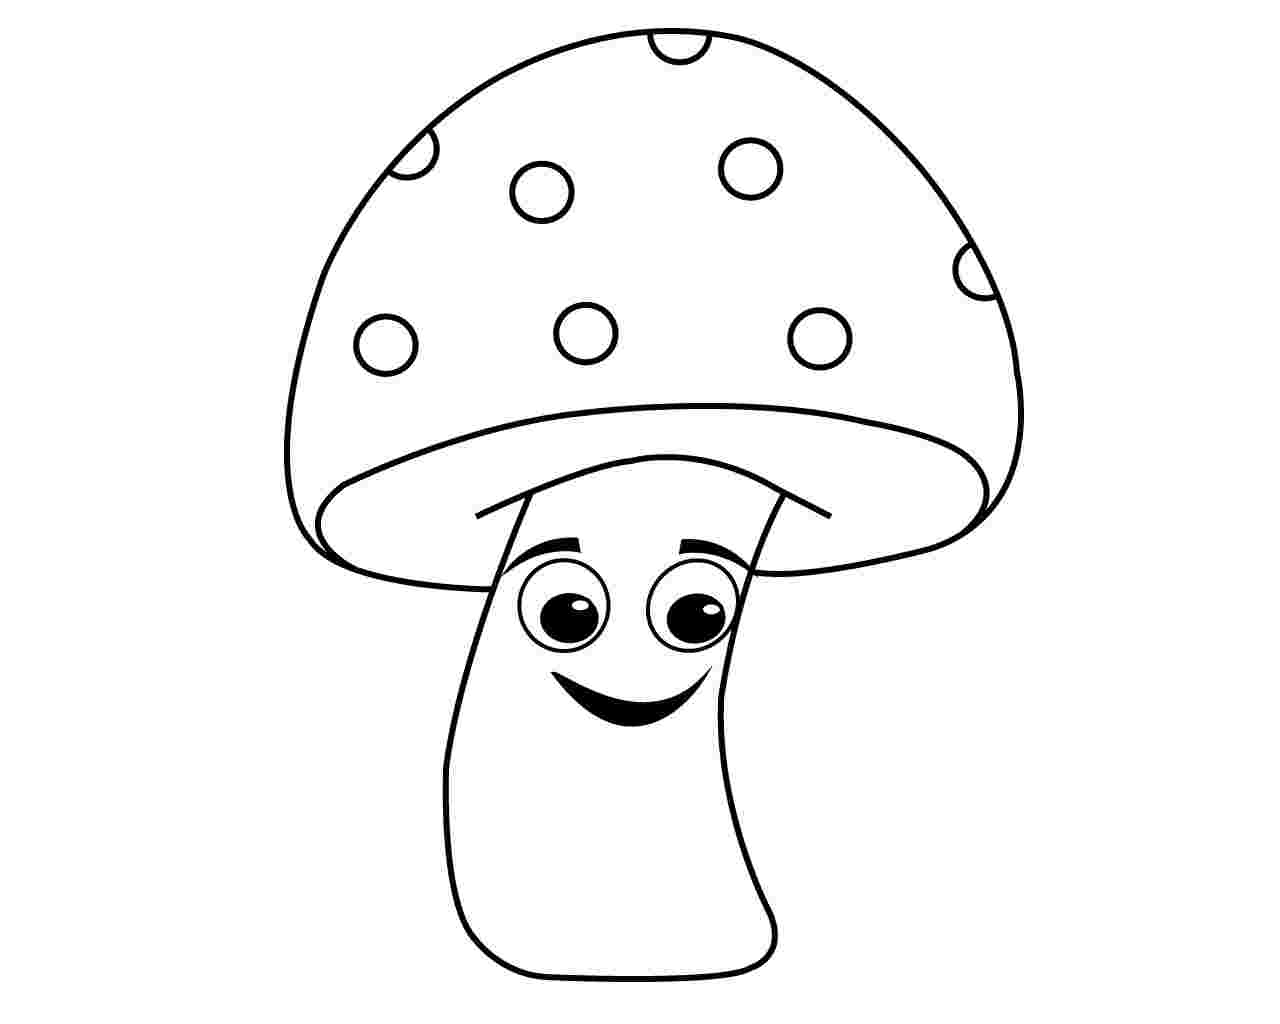 Mushroom Frog Coloring Pages Coloring Pages